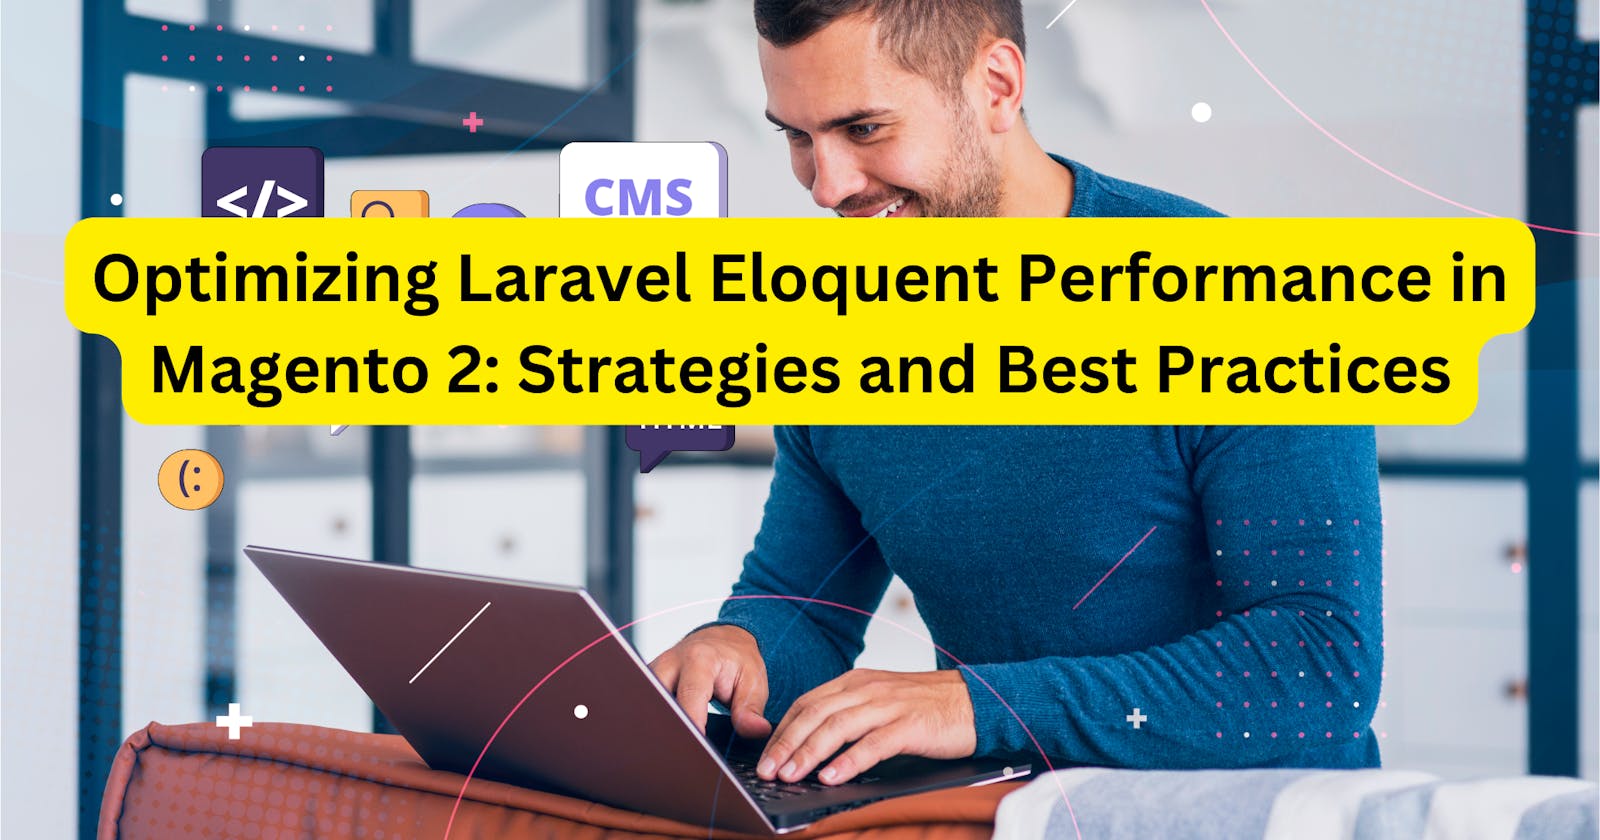 Optimizing Laravel Eloquent Performance in Magento 2: Strategies and Best Practices